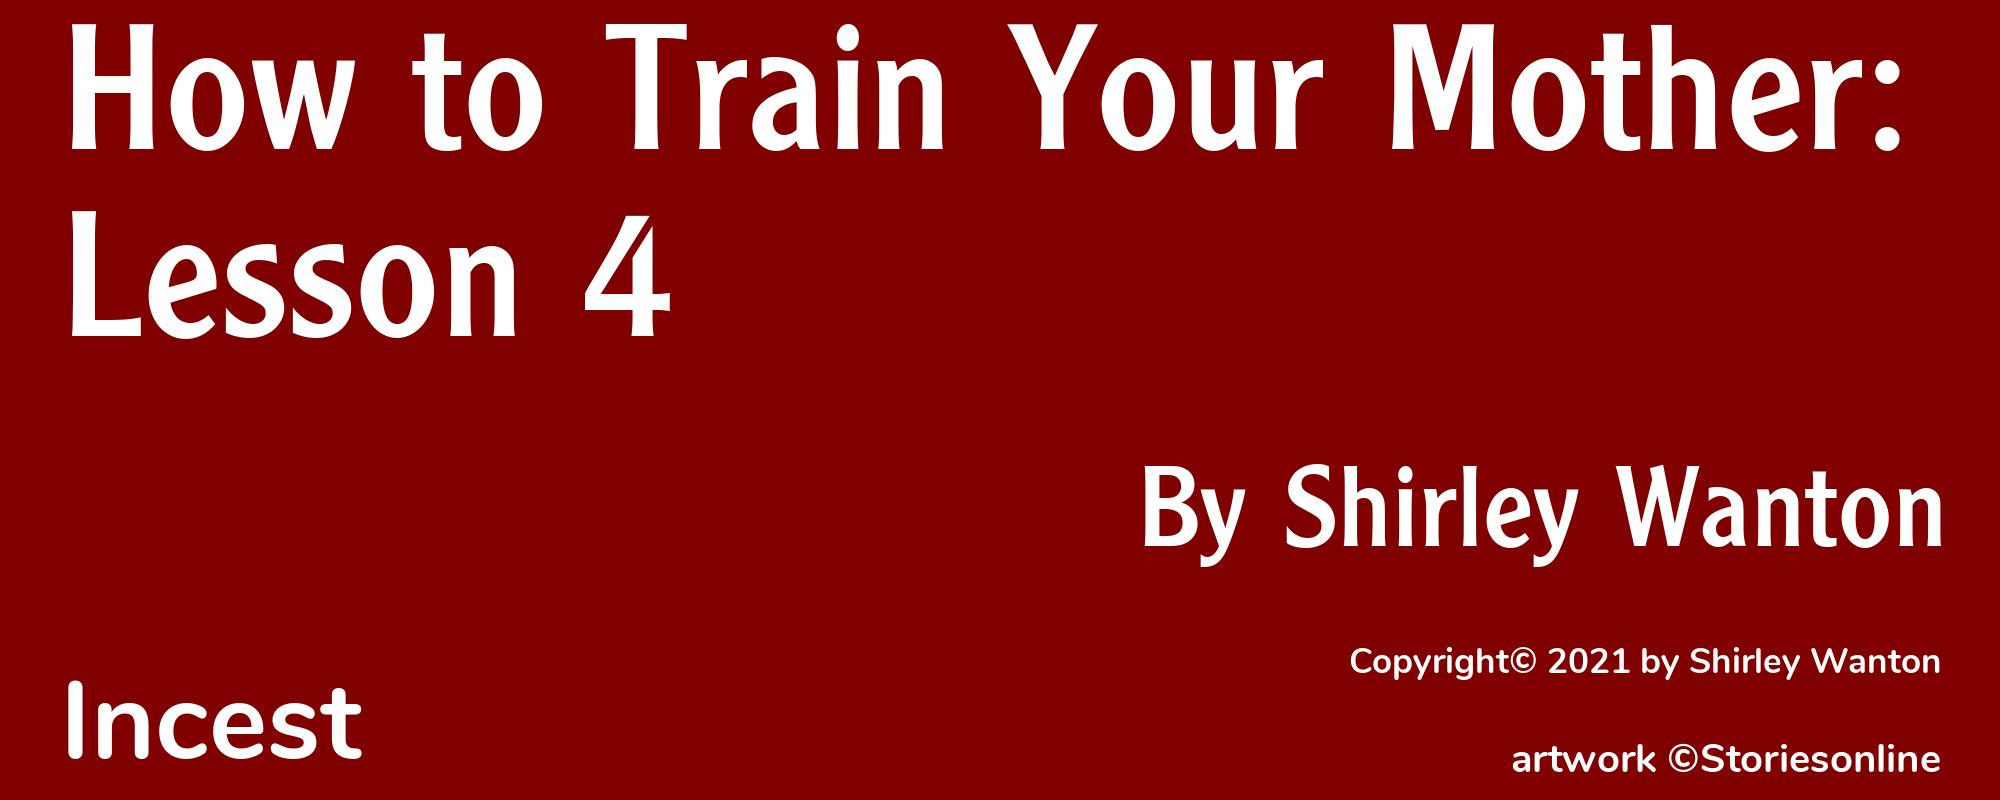 How to Train Your Mother: Lesson 4 - Cover